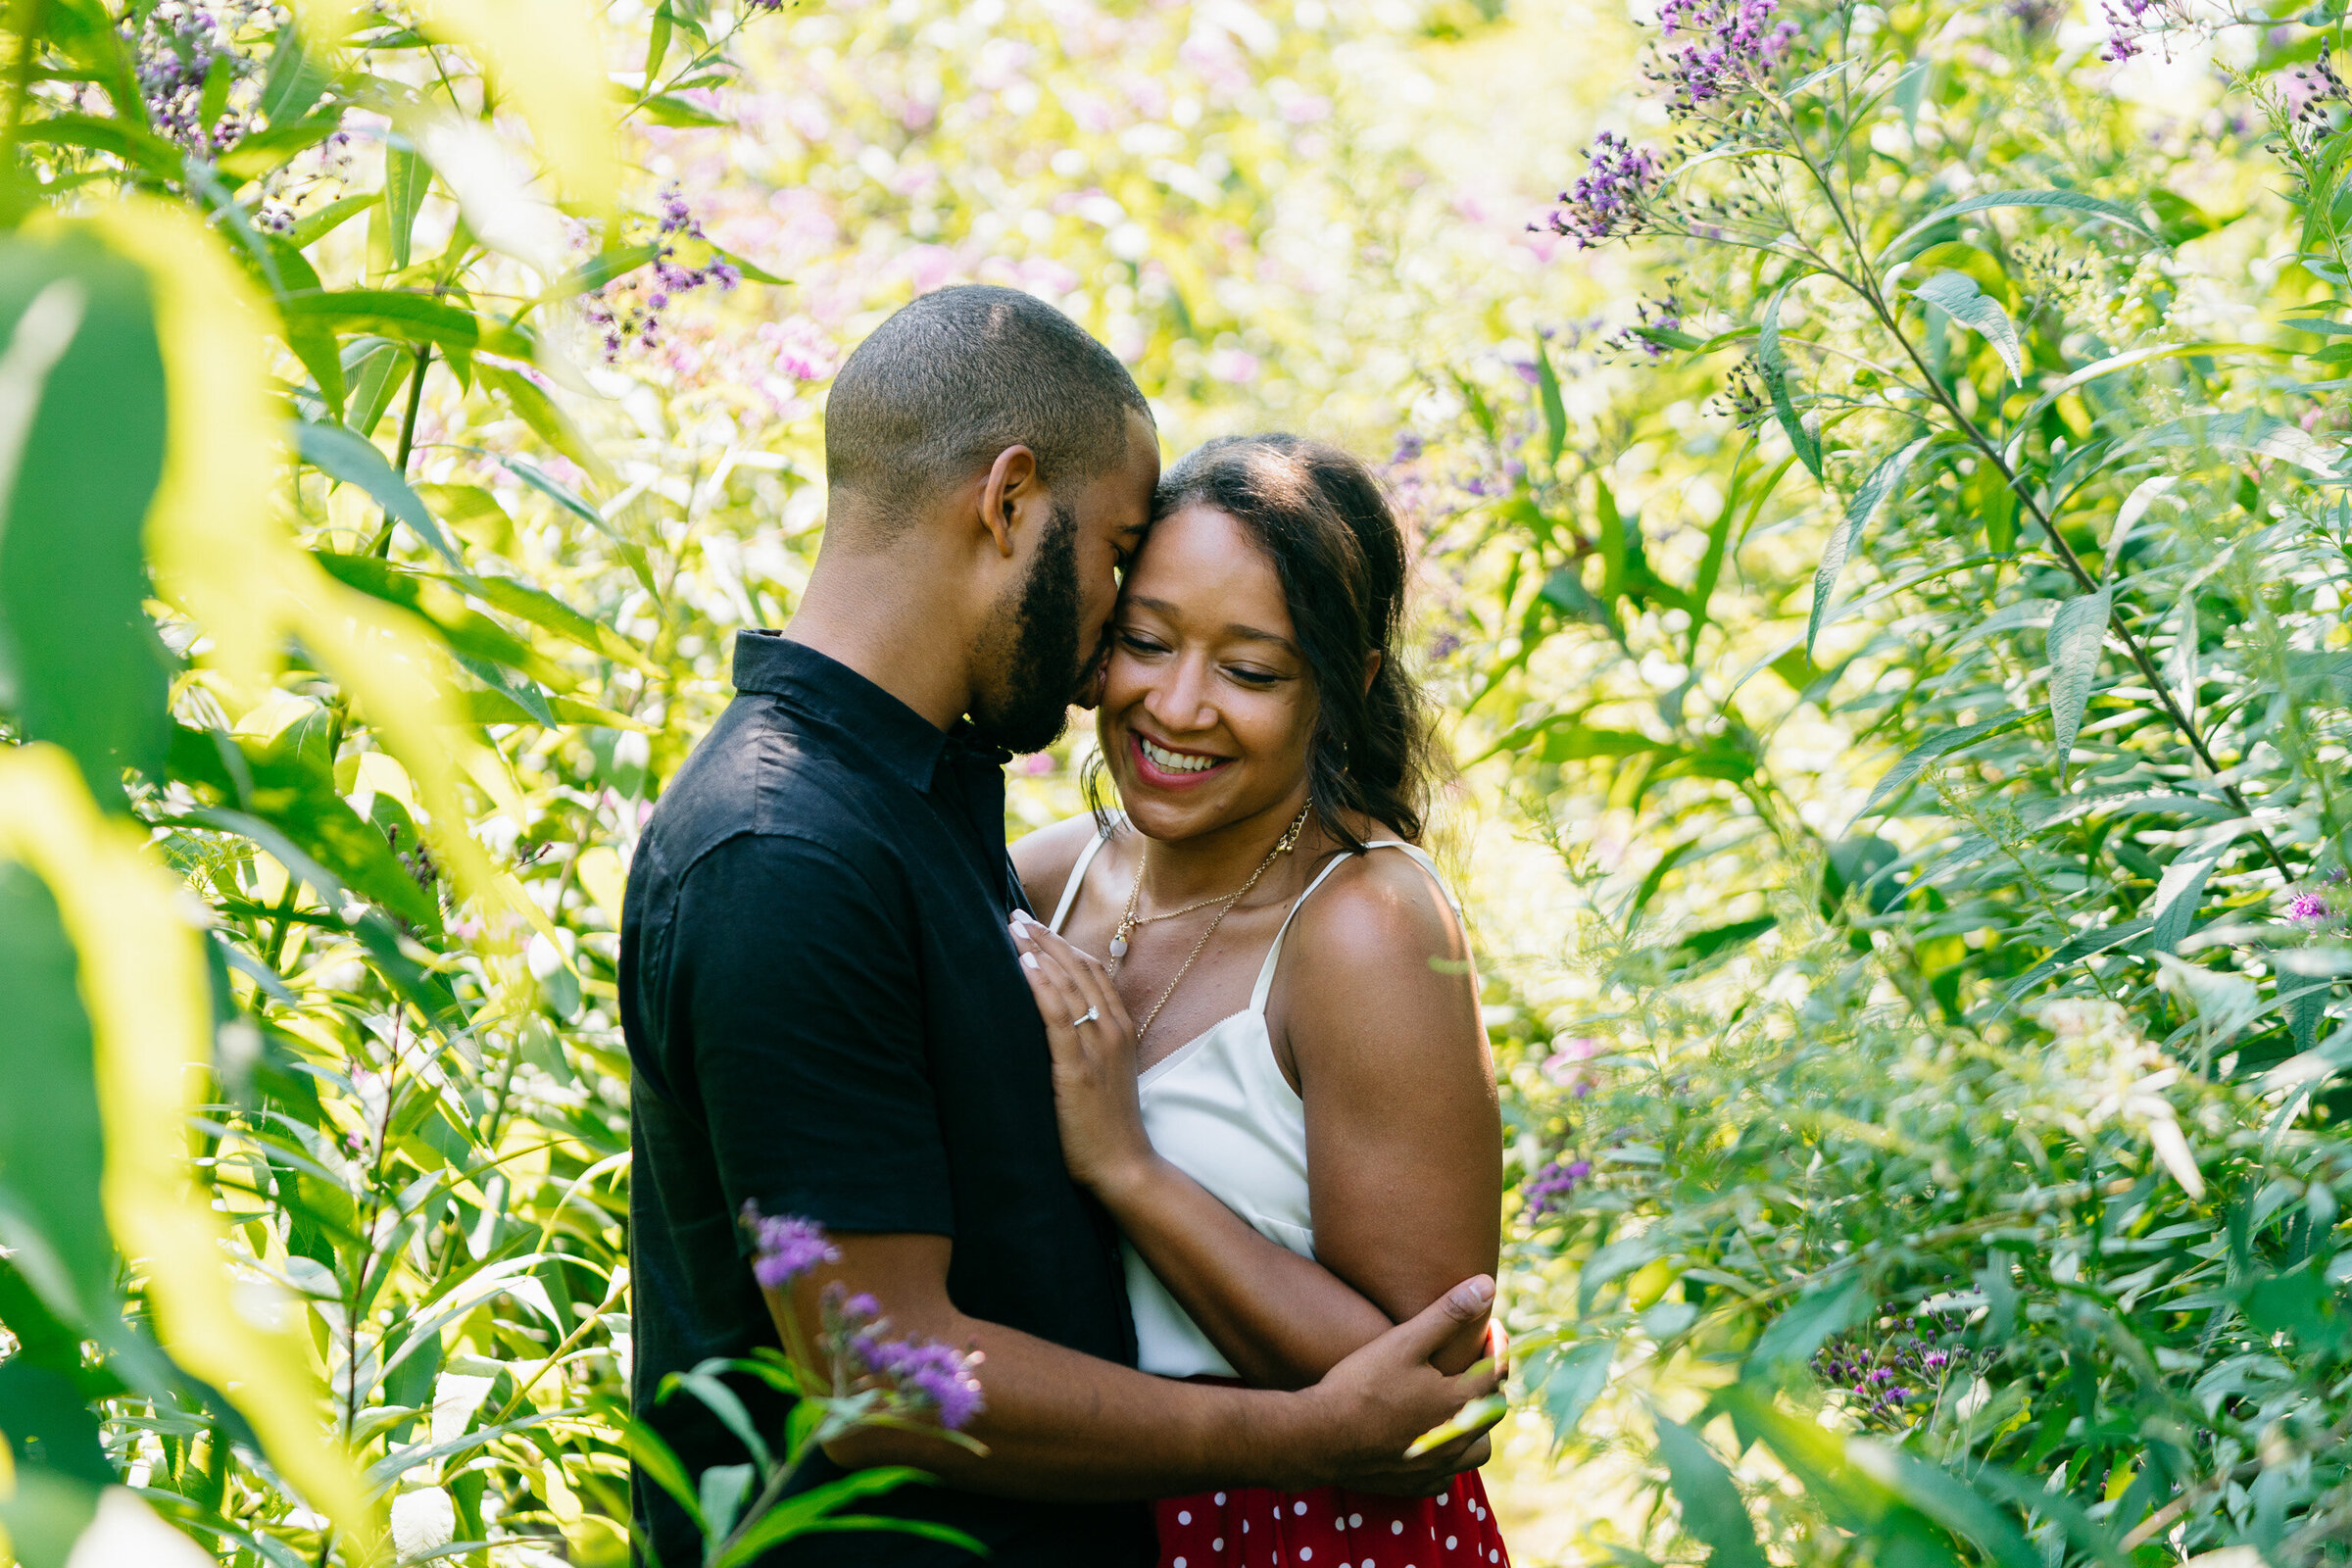 Summer engagement photoshoot in the Lincoln Park, Chicago